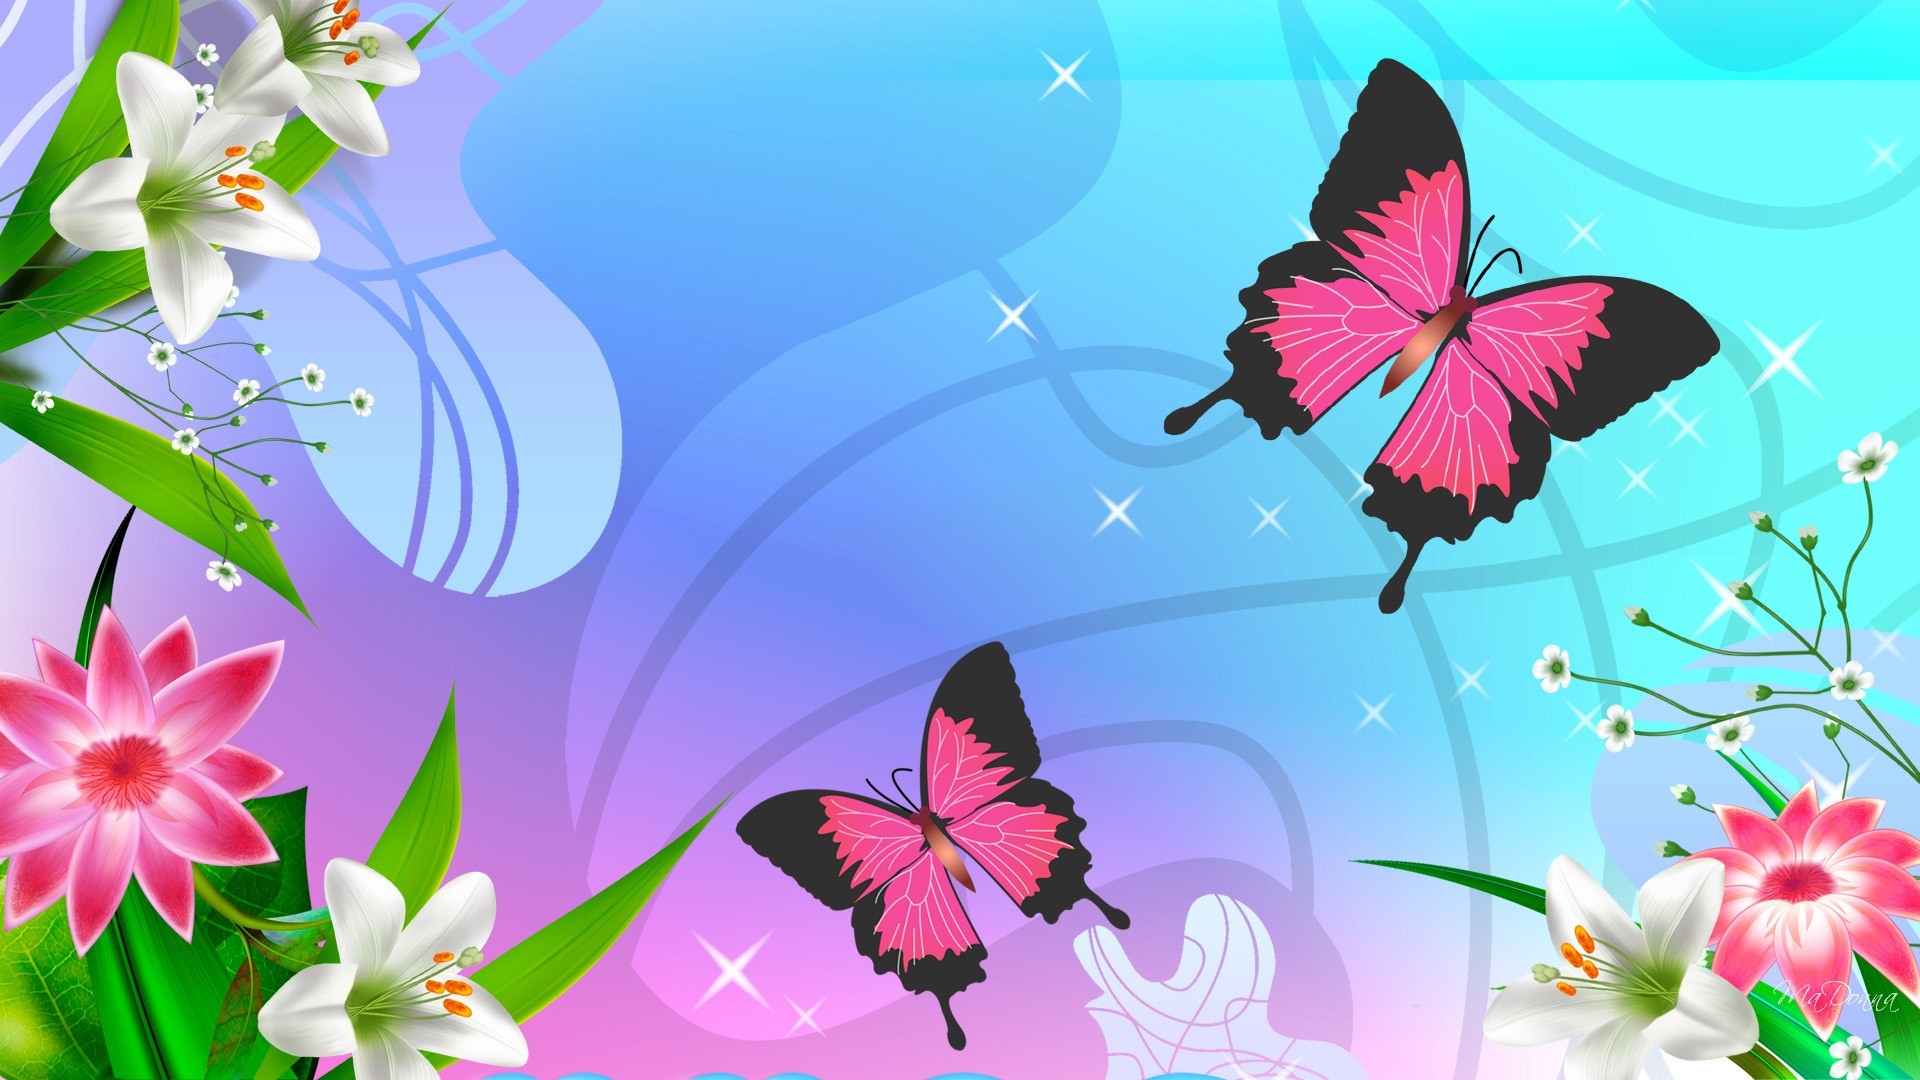 Download From Cute Butterfly Wallpaper 1920x1080 Full HD Wallpapers